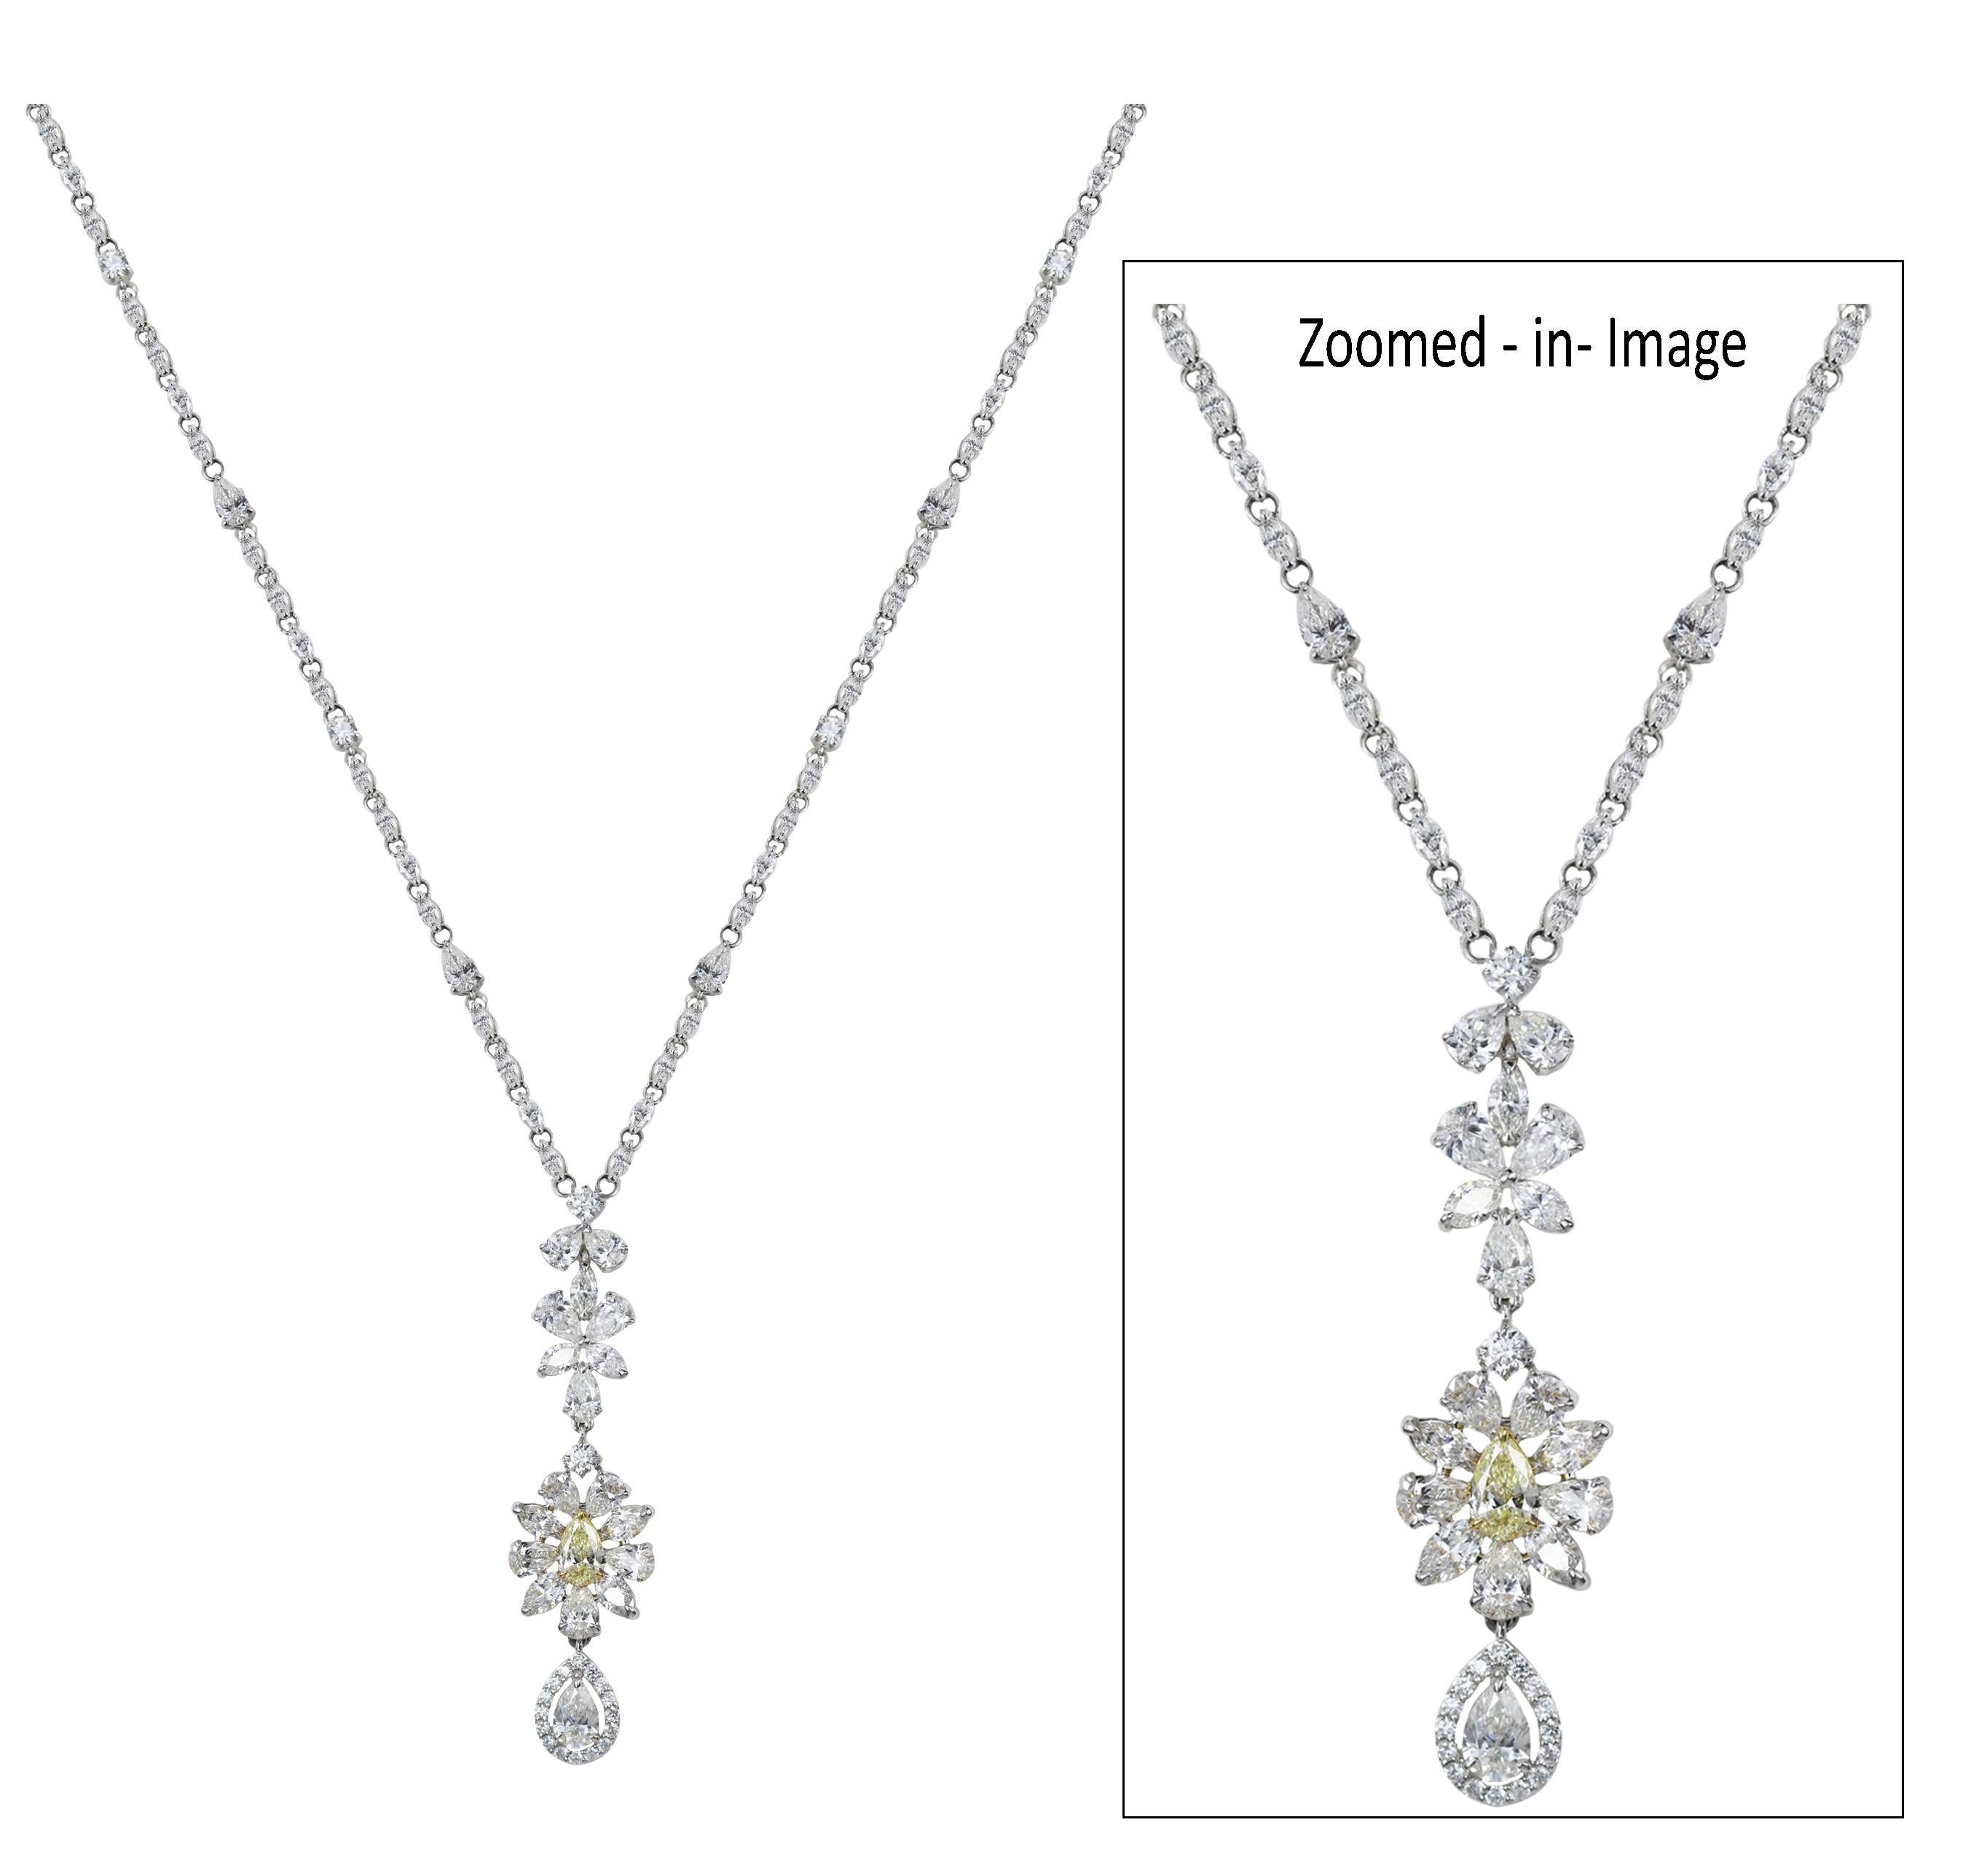 White and yellow diamond necklace

With its nuanced design, this 18K white and yellow gold necklace studded marquise, pear, round brilliant cut white and yellow diamonds will appeal to sophisticated sensibilities. Each of the 171 stones have been